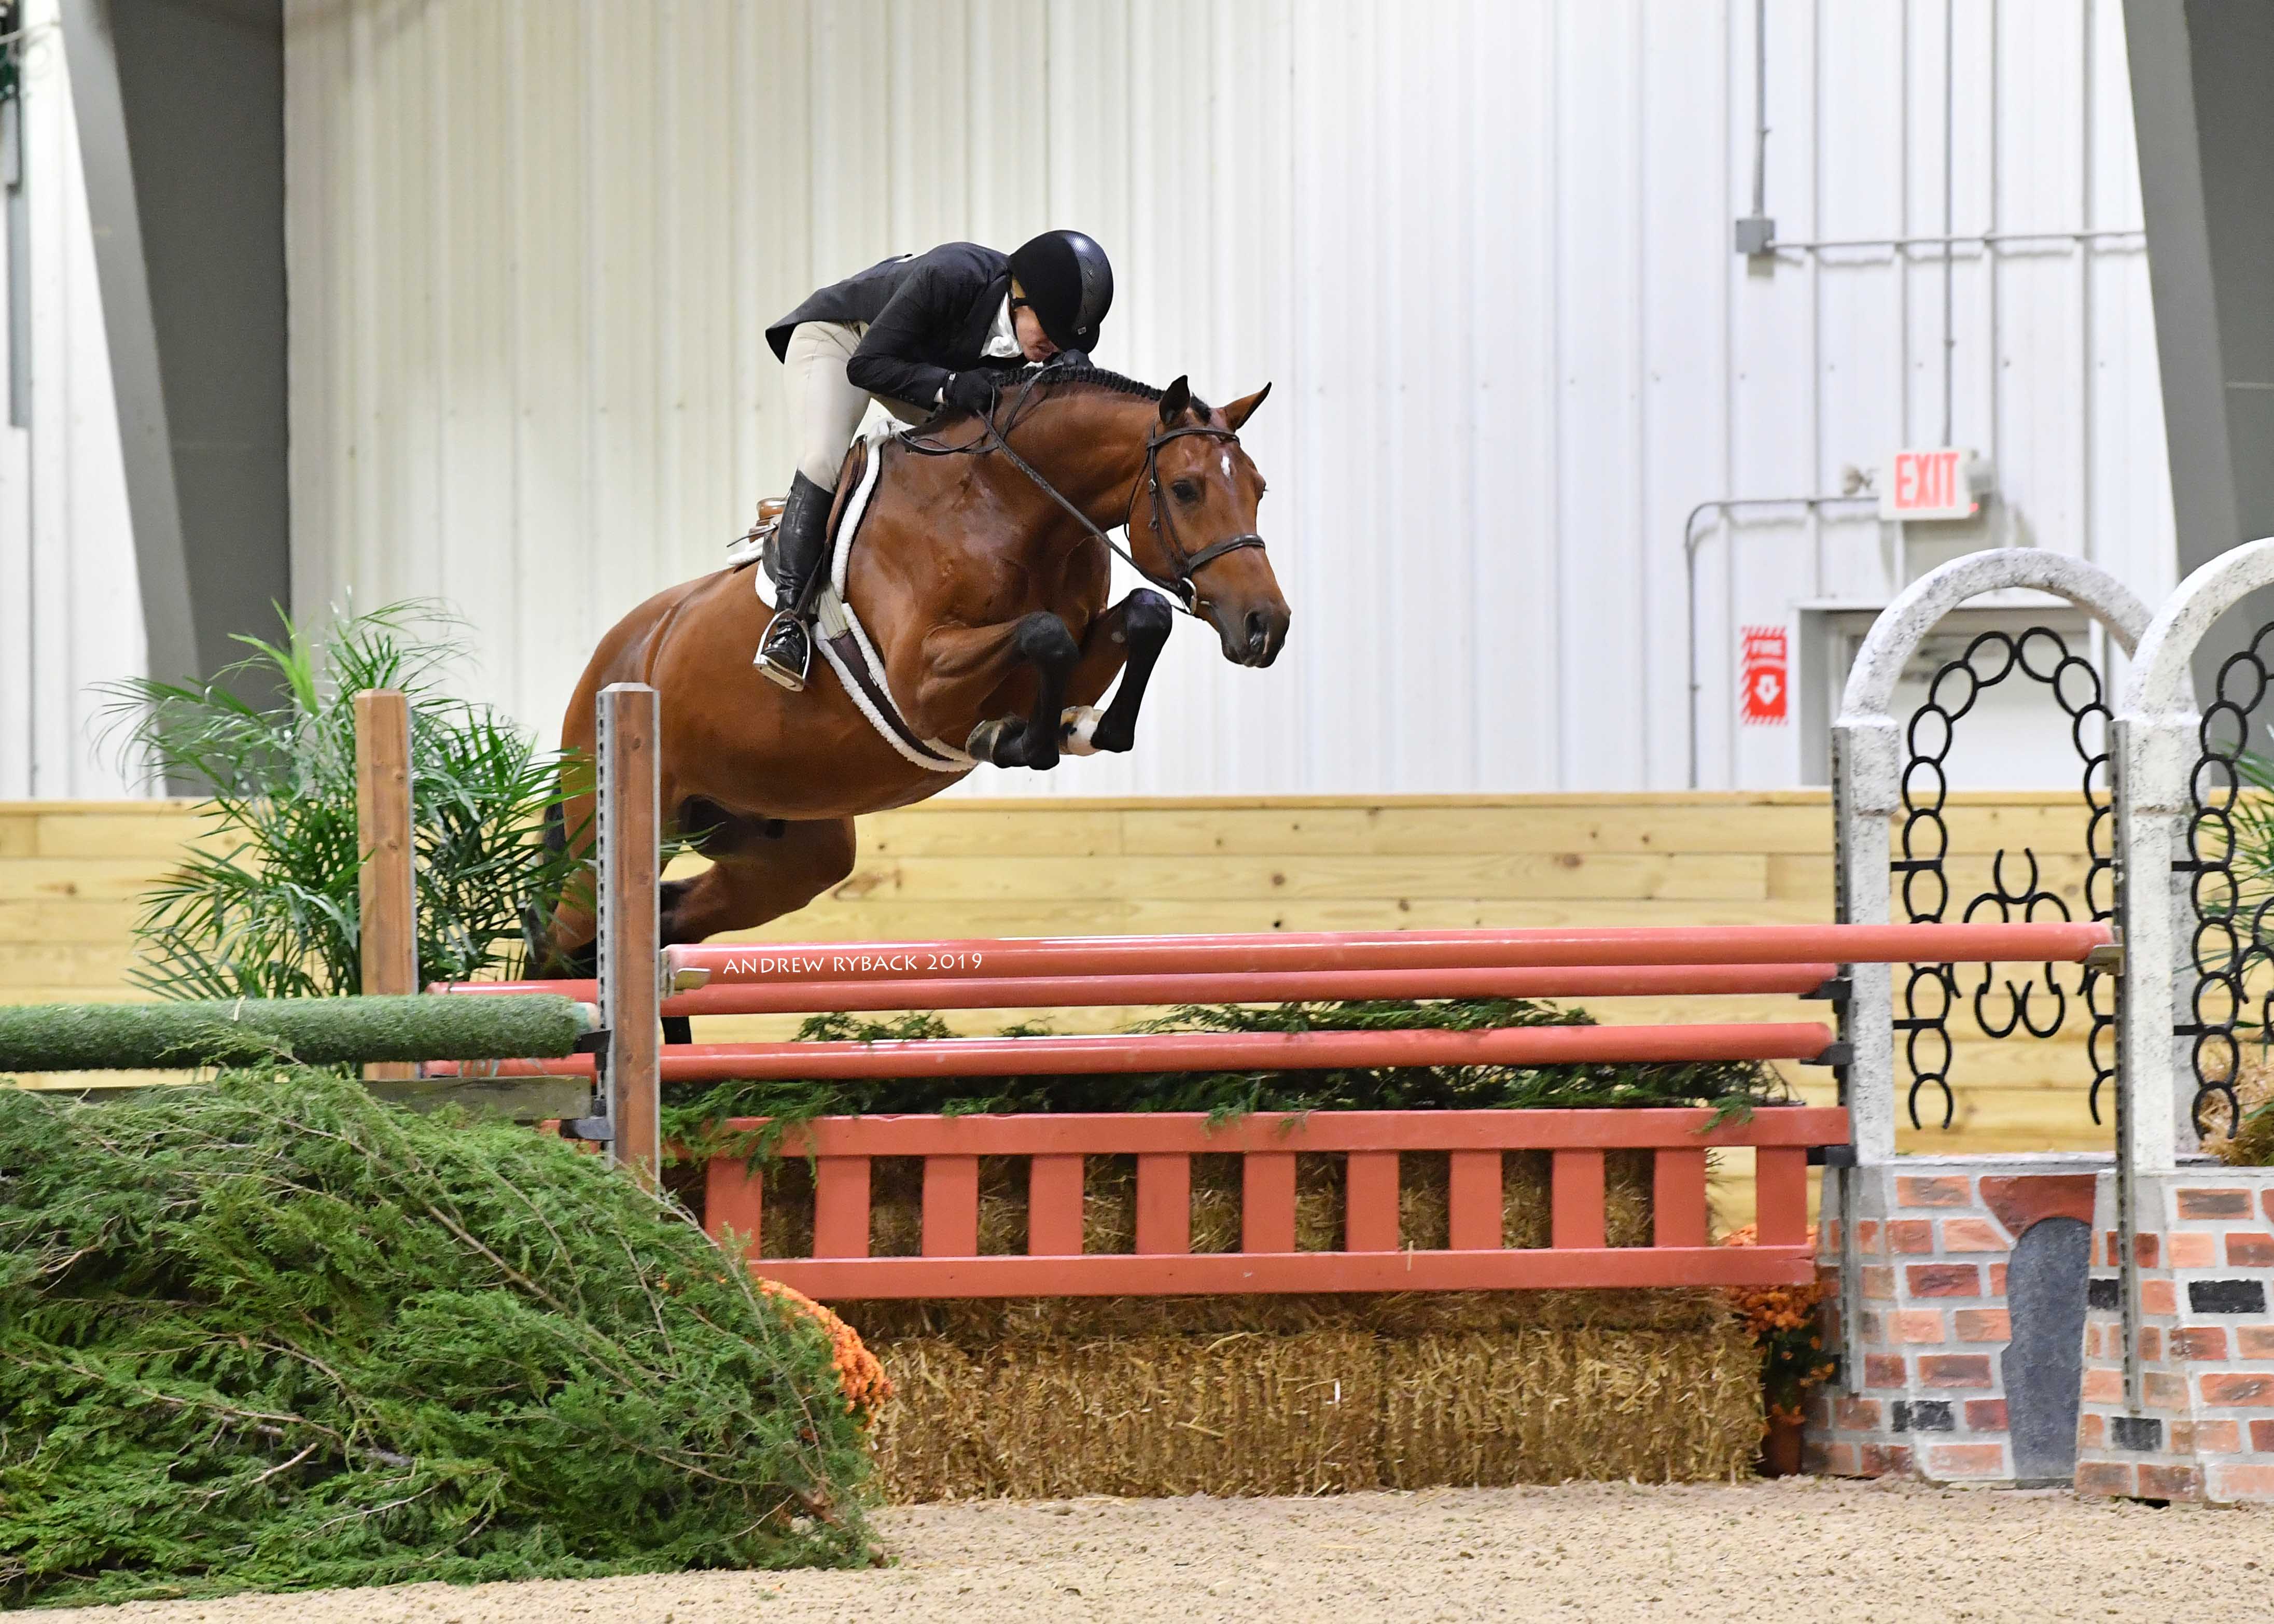 Equestrian Honors Crolick the Top USHJA and Derby Corallo - Greg Take Z $40,000 Hunter International World Center in